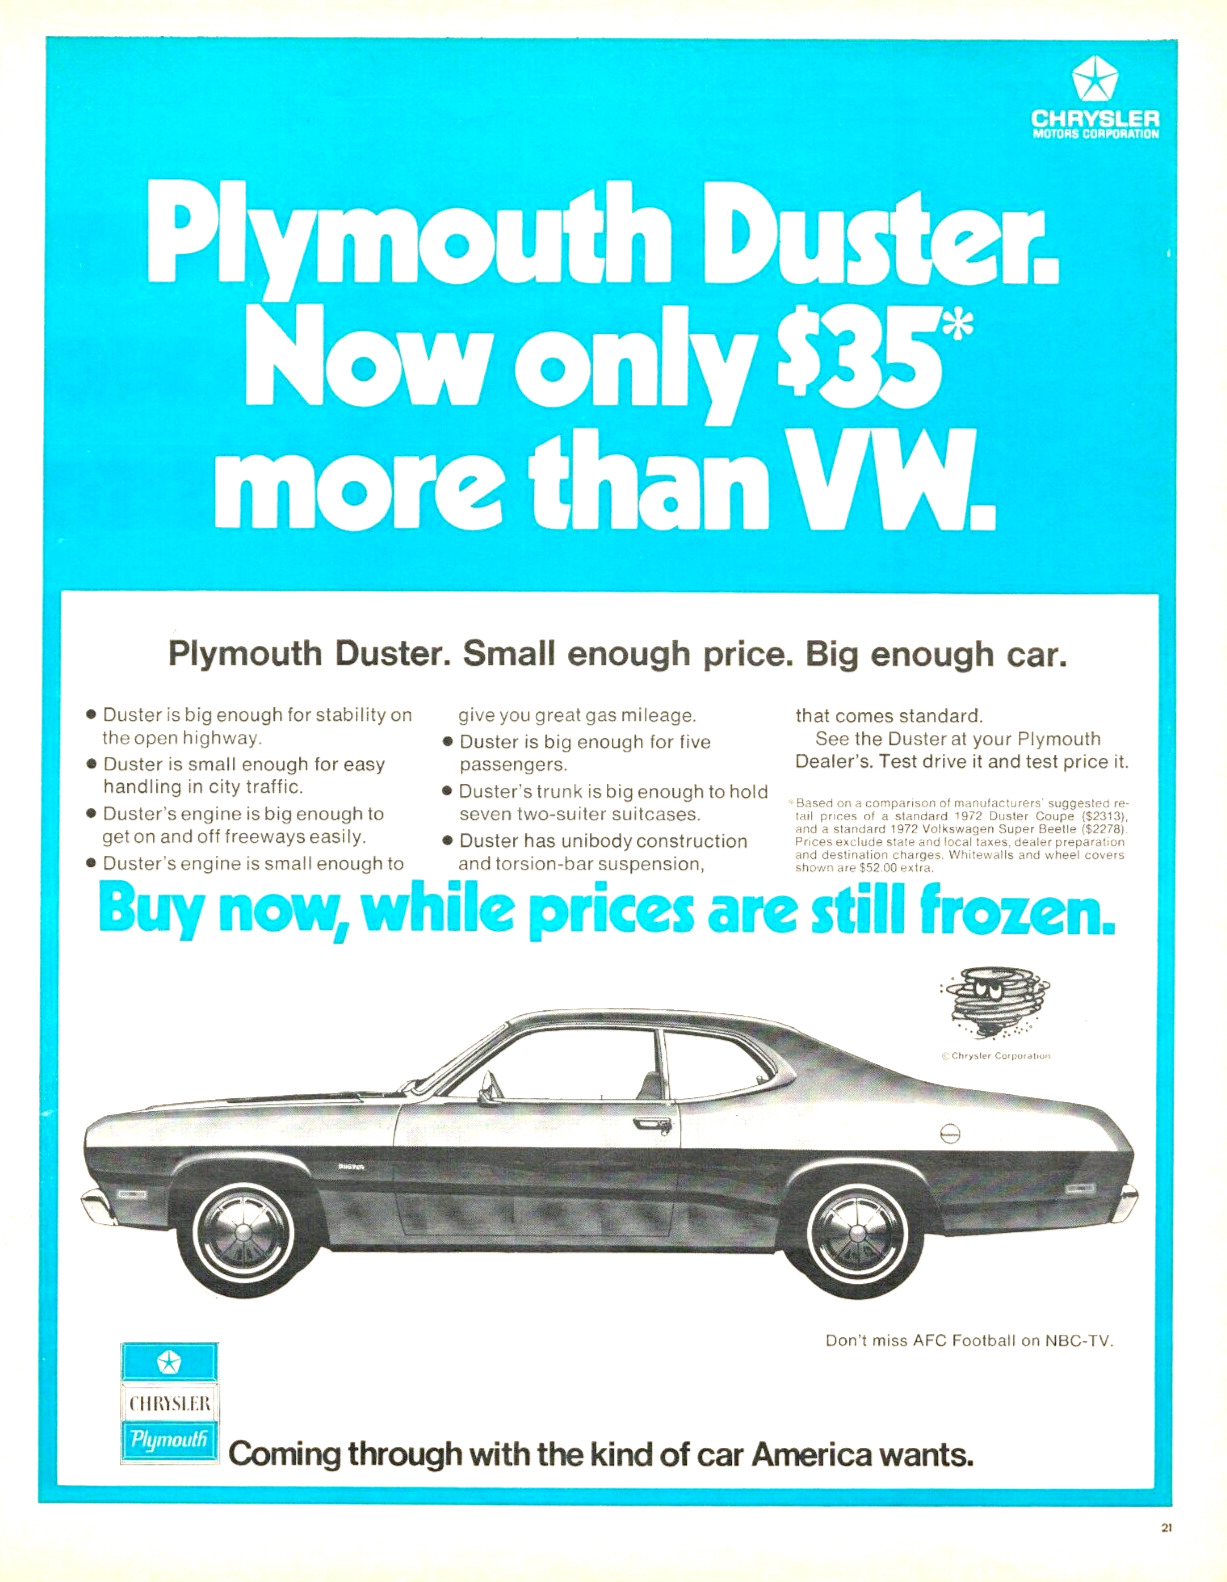 1971 PLYMOUTH DUSTER car automobile vintage PRINT AD classic auto Chrysler